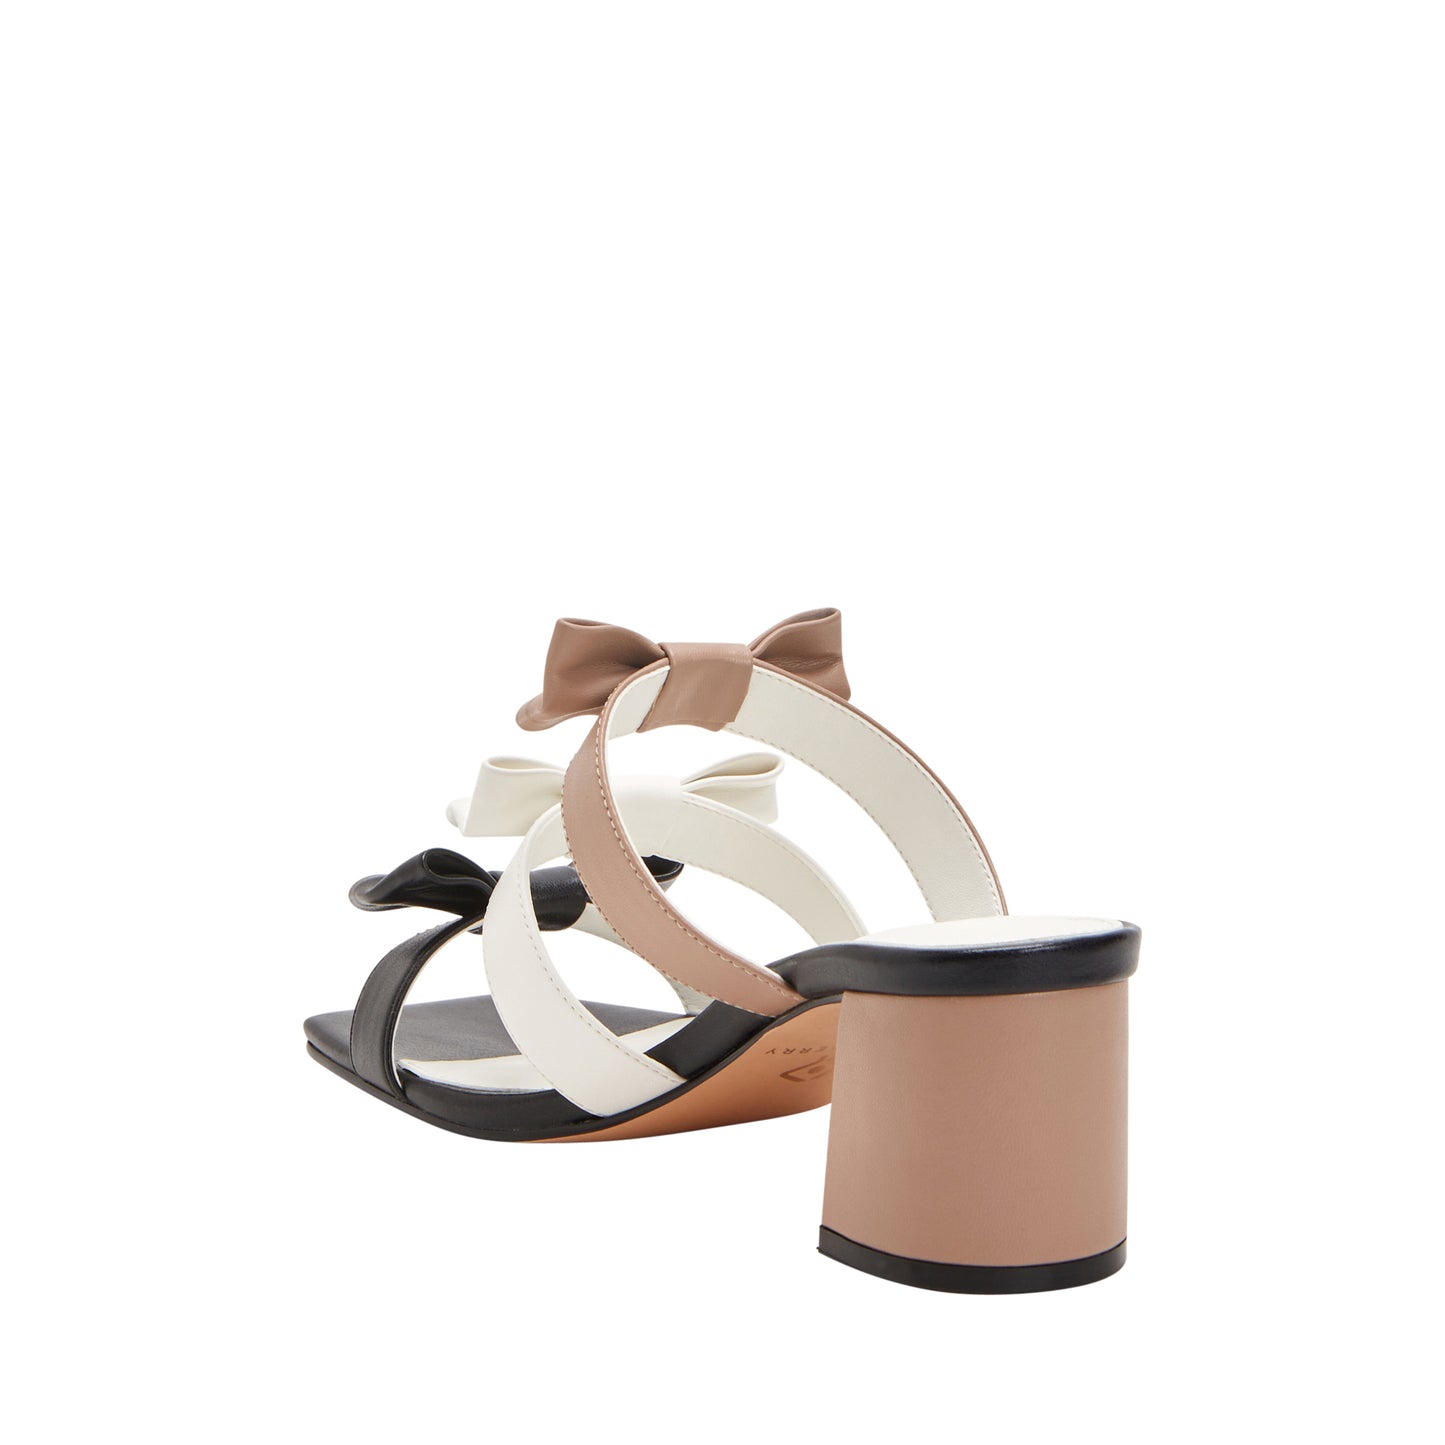 THE TOOLIPED BOW  SANDAL